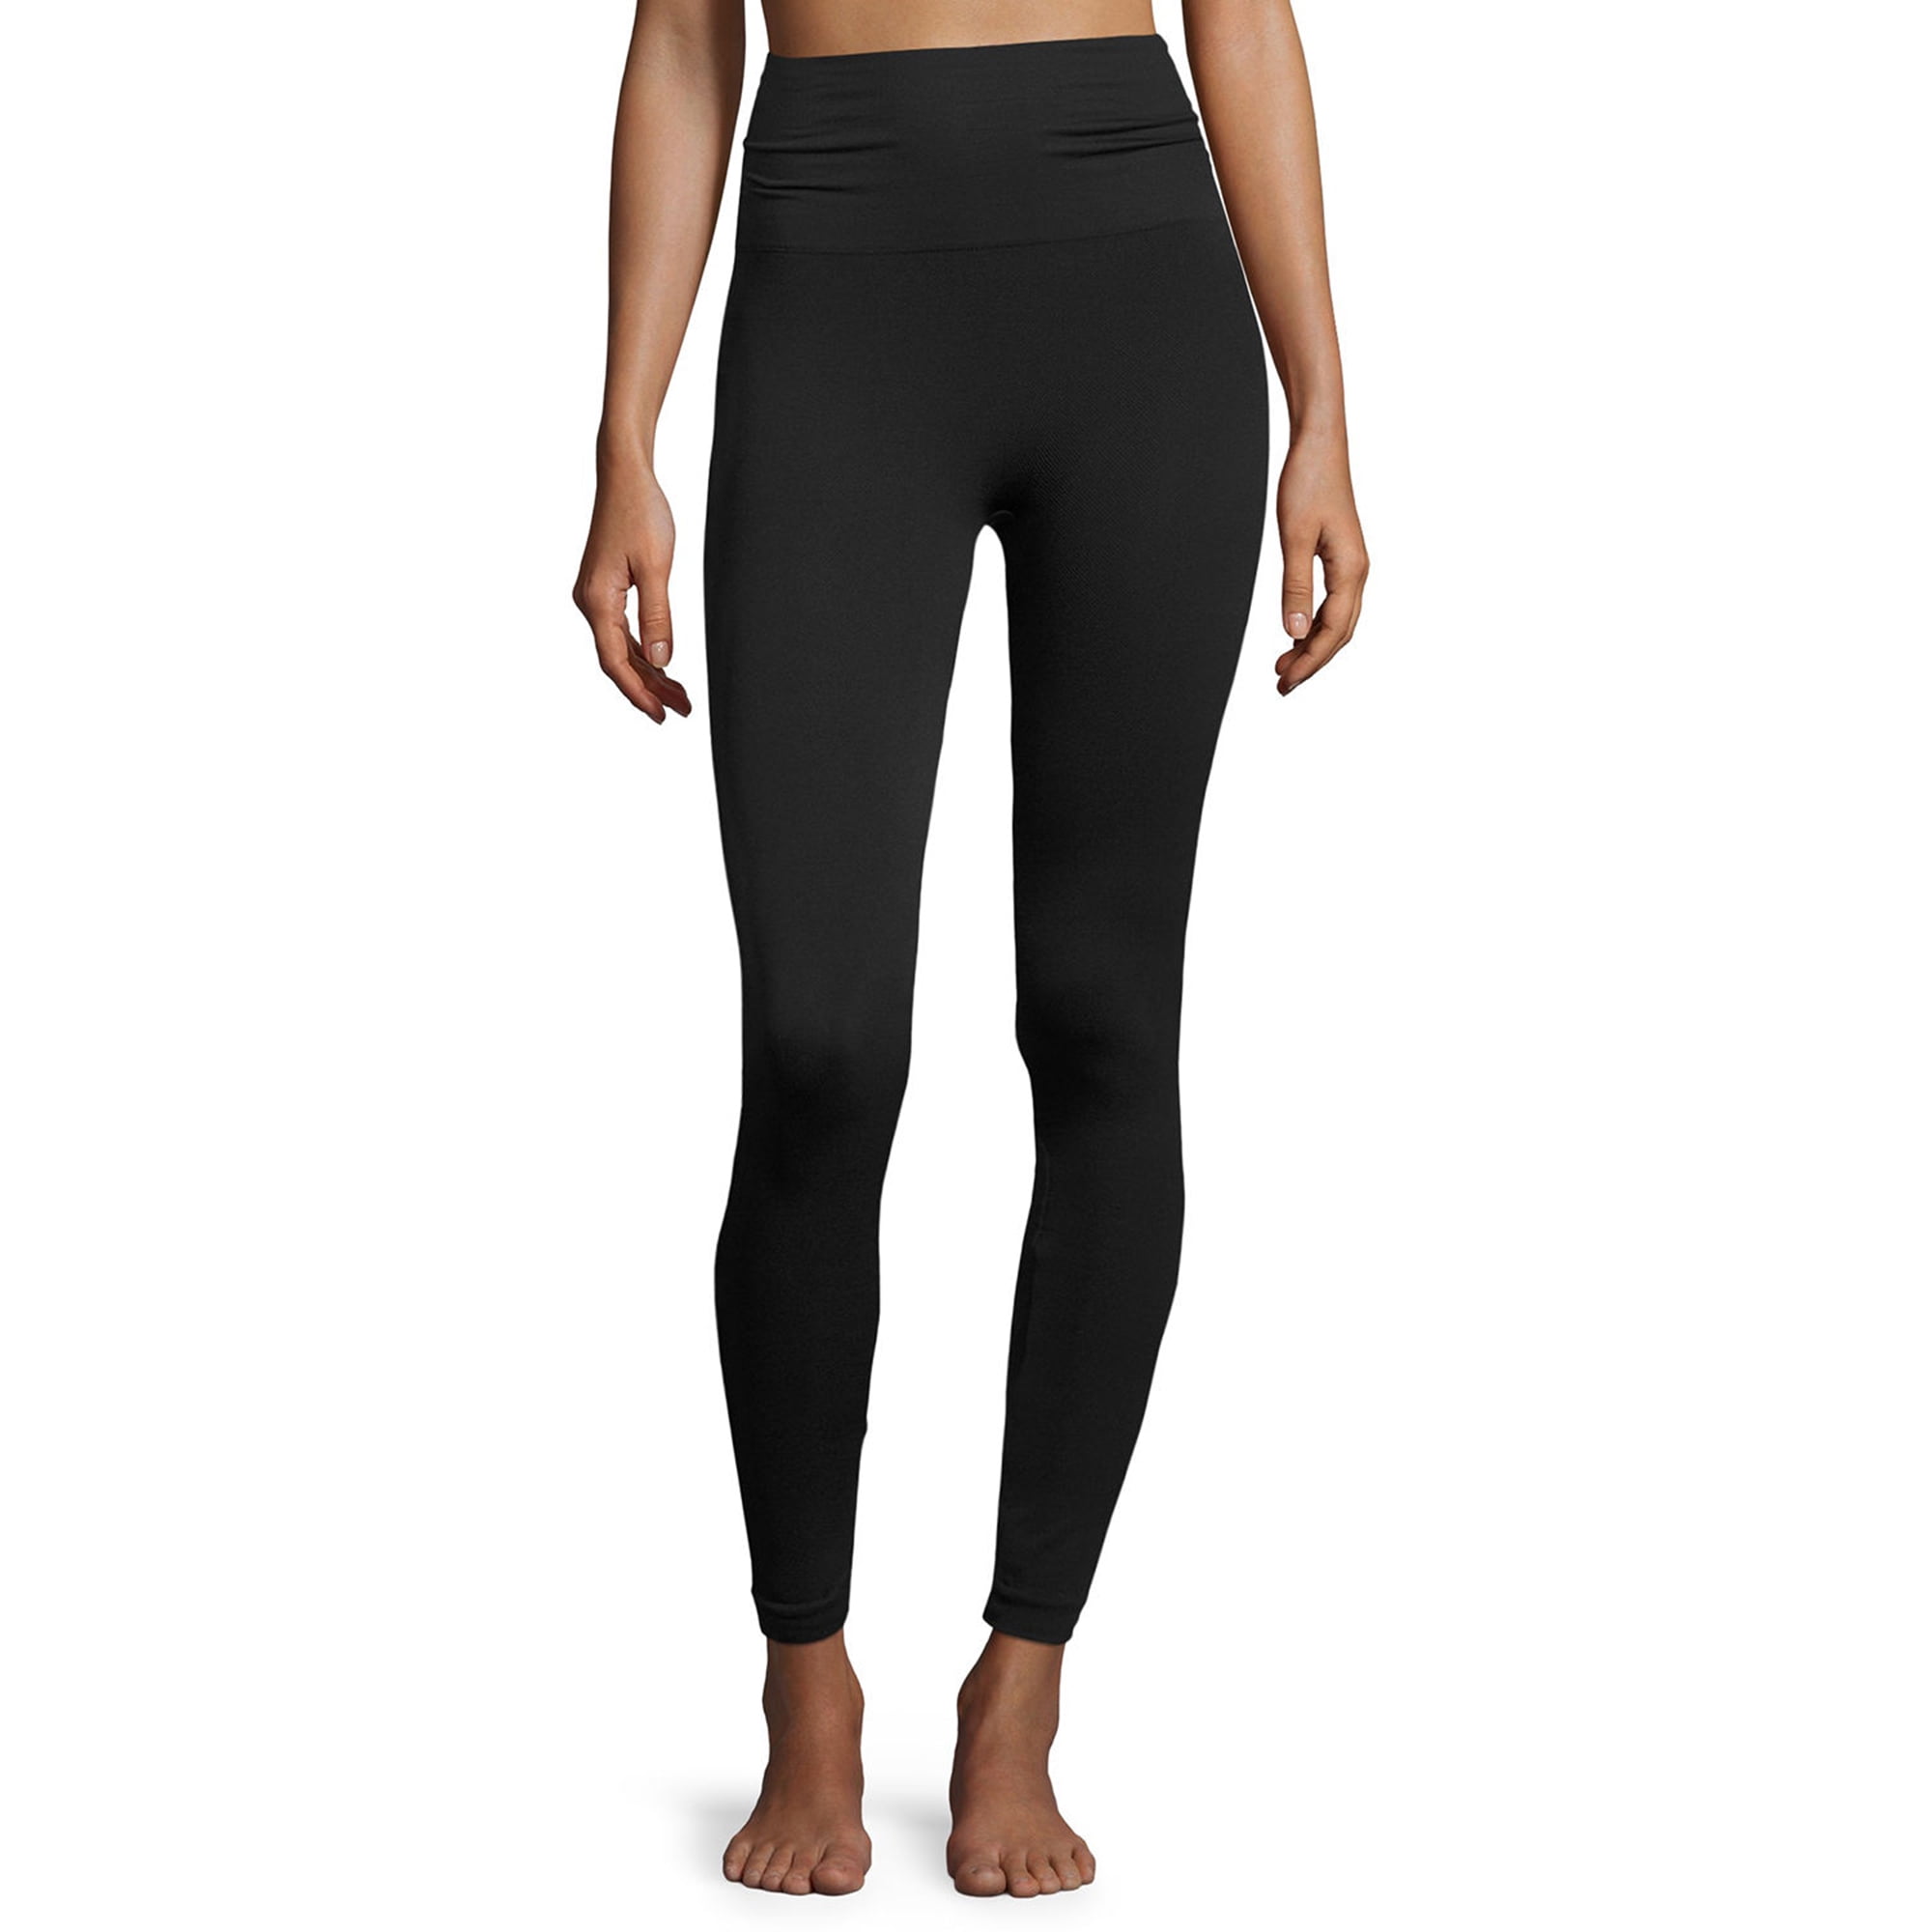 Spanx Faux-Leather Leggings review: Are they worth it? - Reviewed